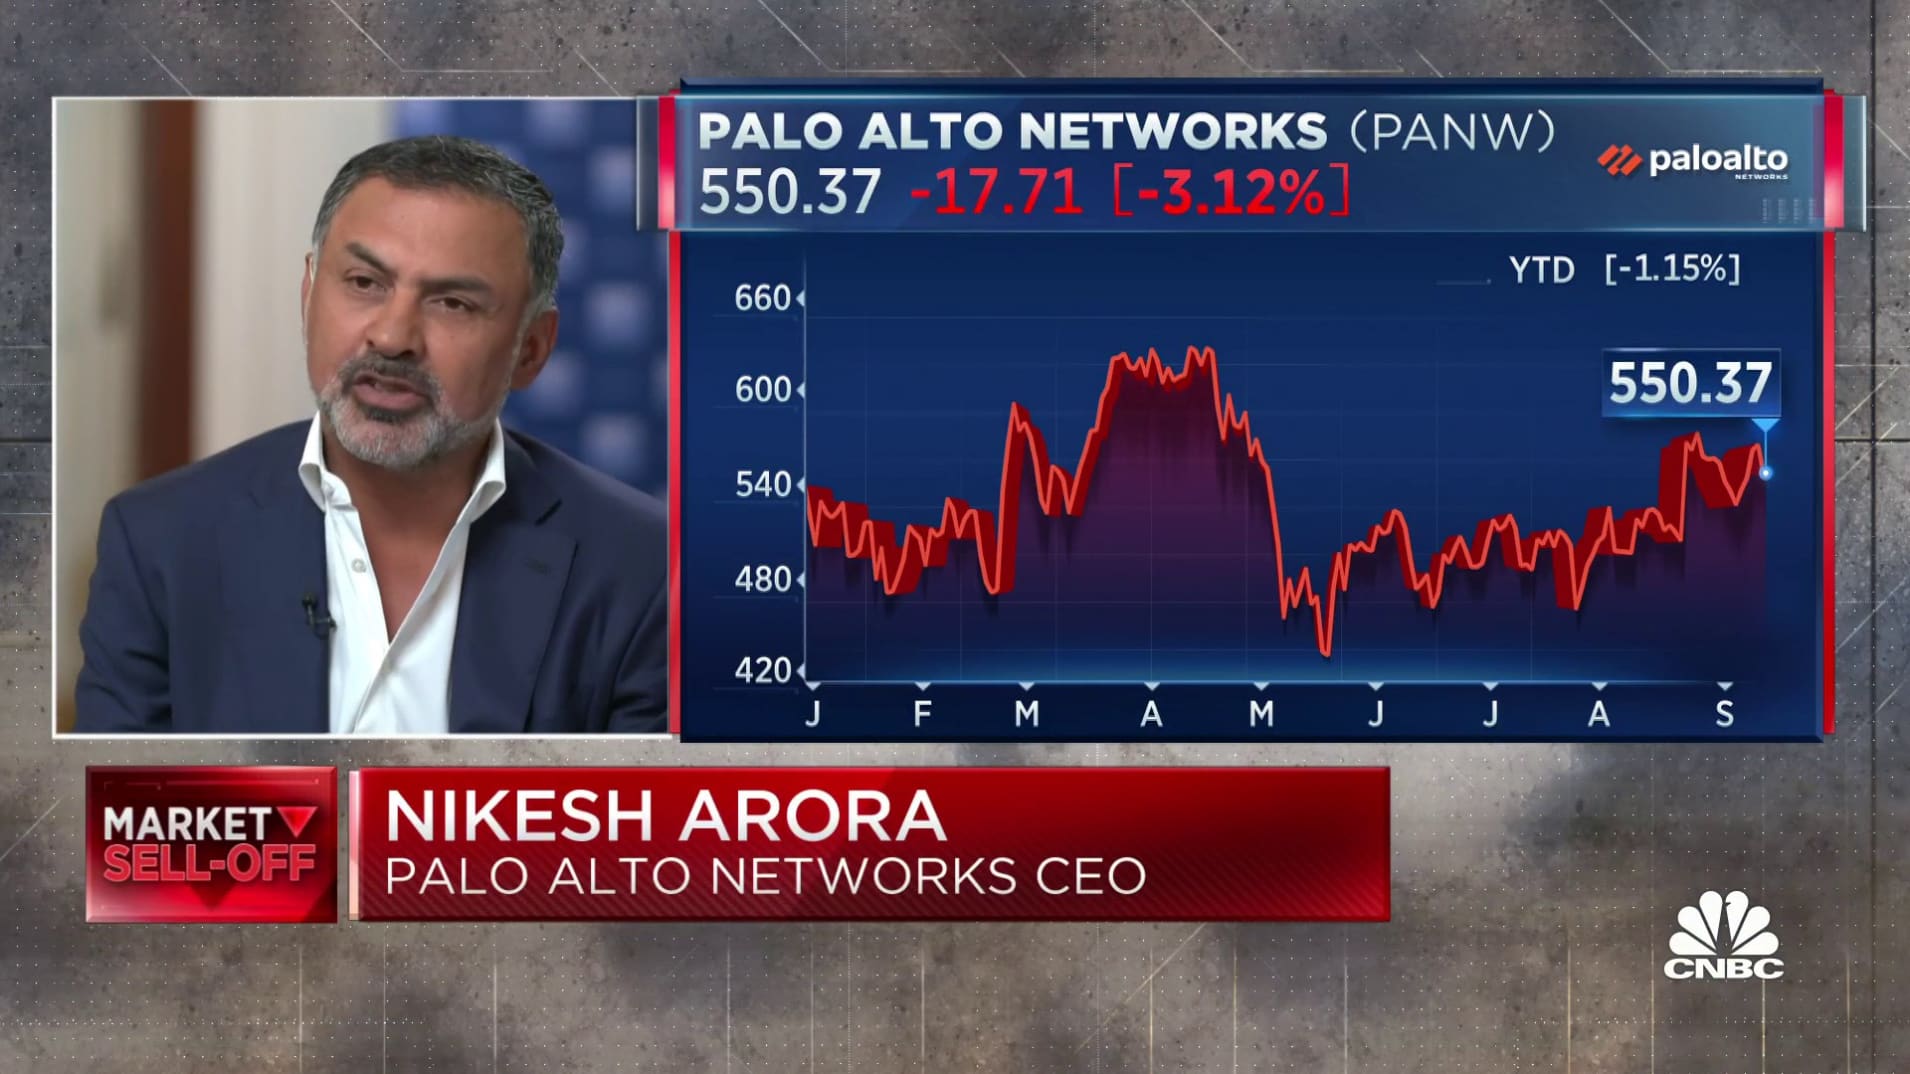 We are not seeing the macro impact in cyber security, says Palo Alto  Networks CEO, Nikesh Arora